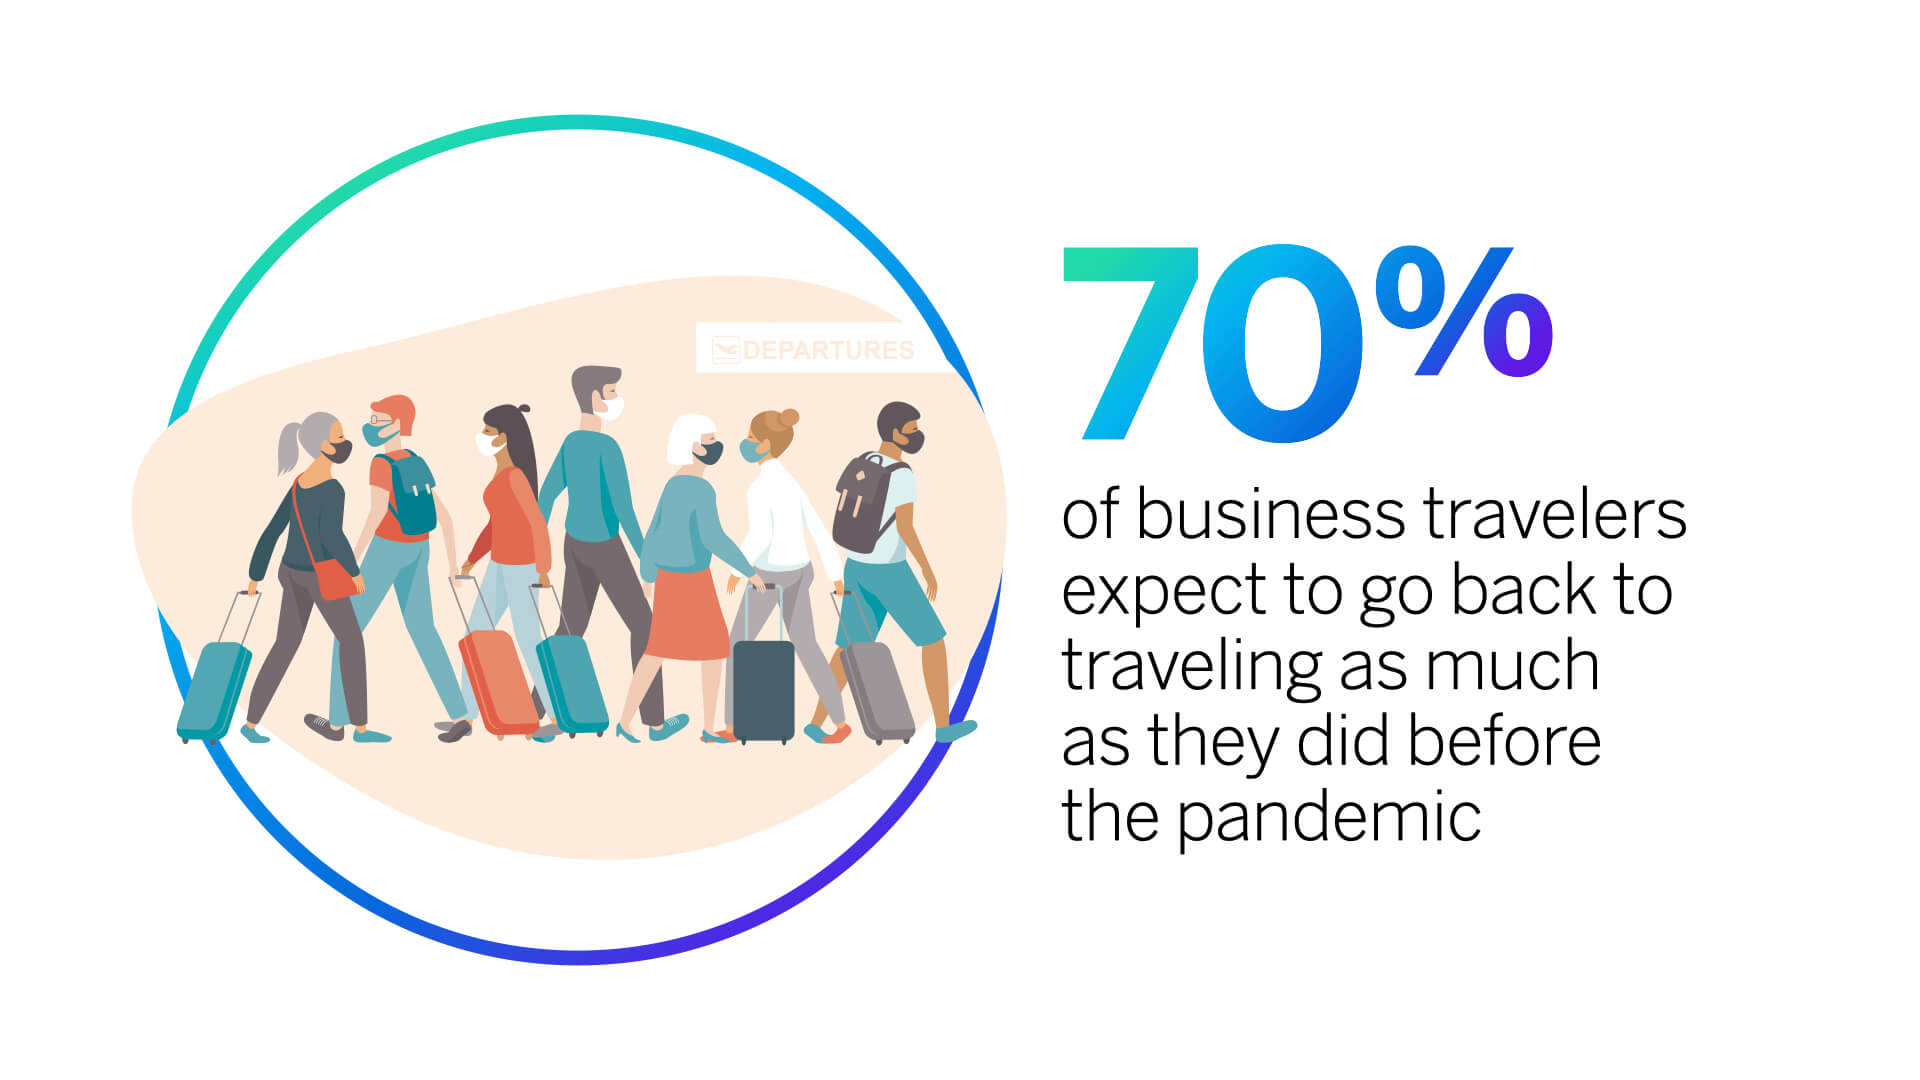 70% of business travers expect to go back to traveling as much as they did before the pandemic